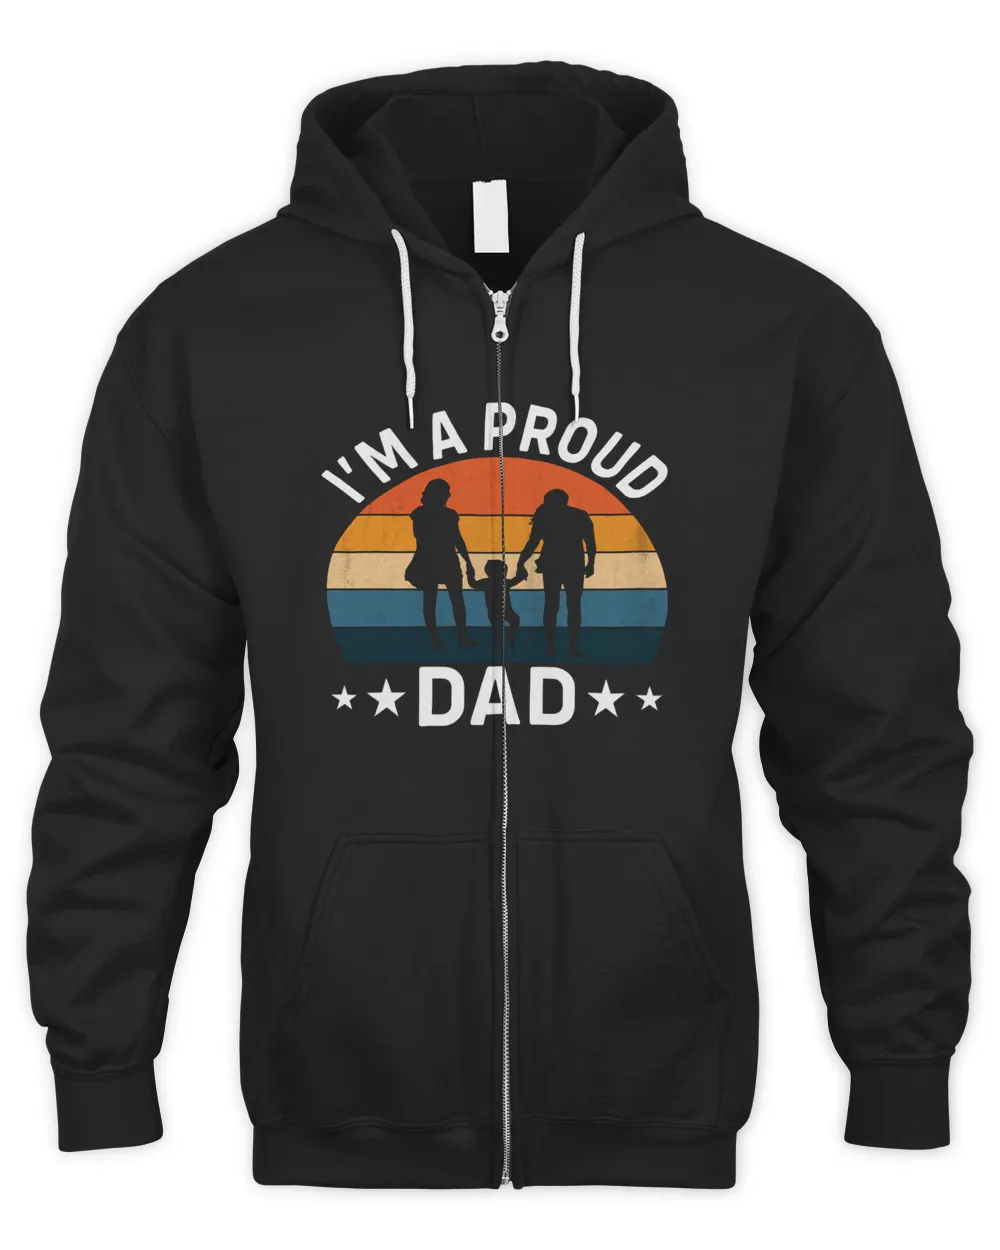 I'm A Proud Dad Fathers Day T shirts